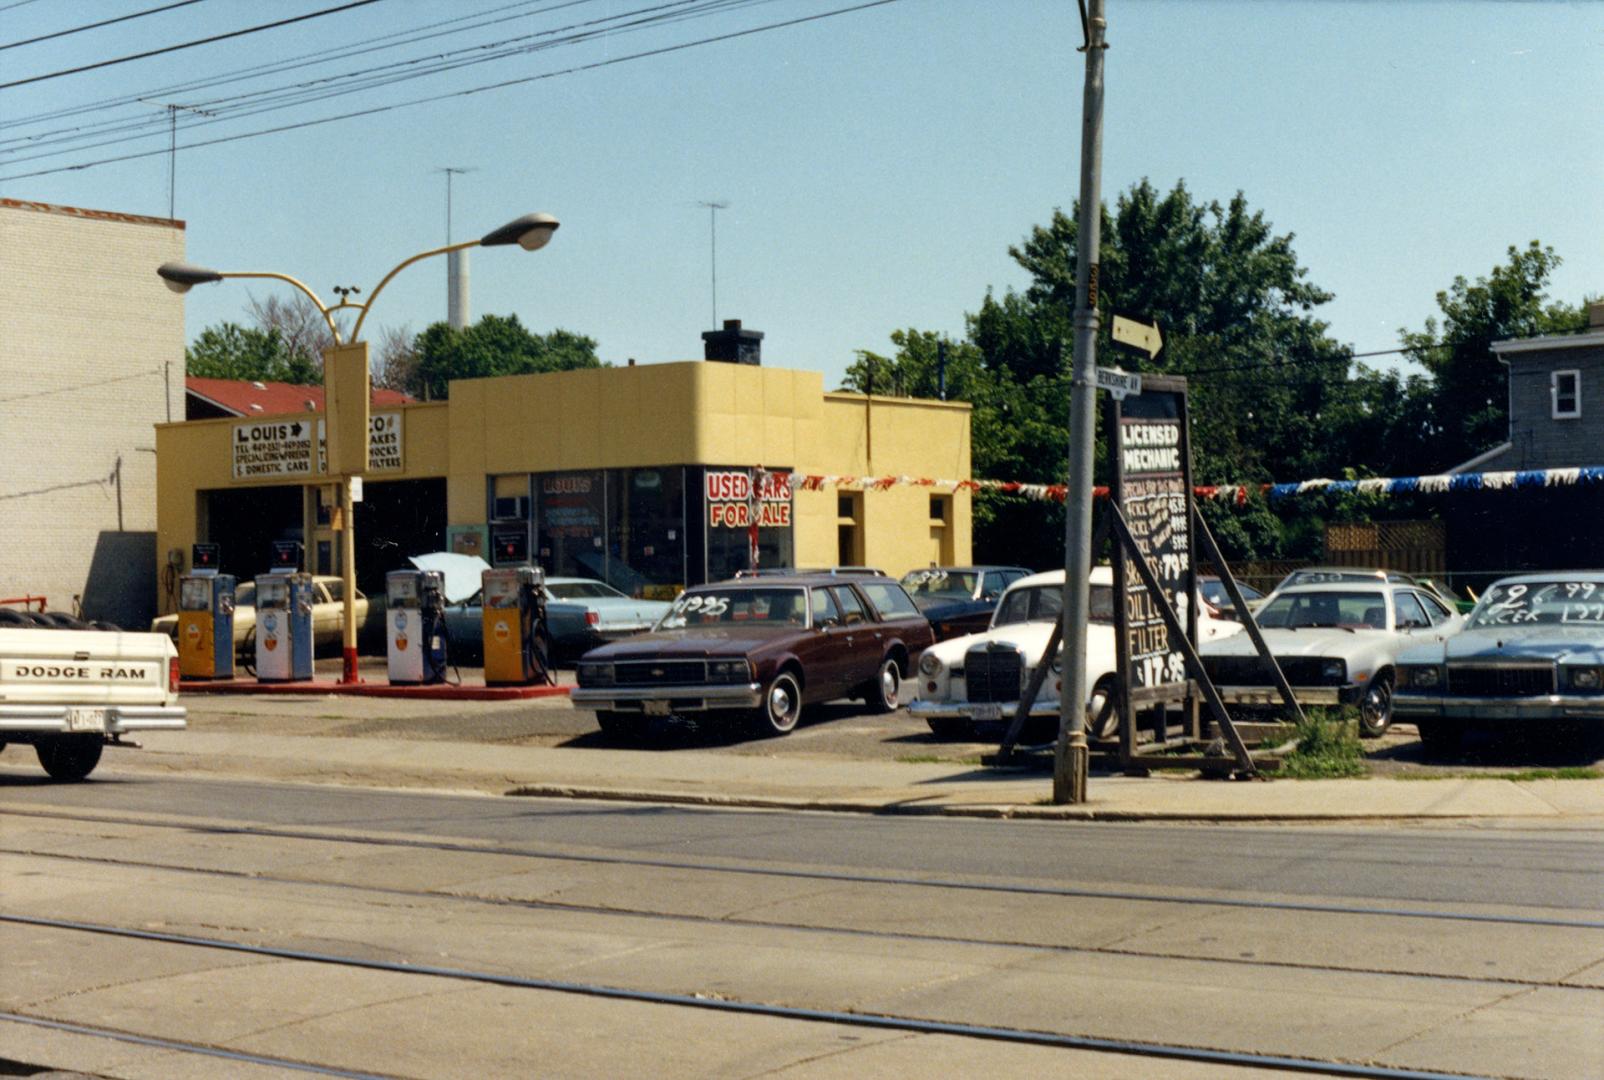 Image shows an auto repair shop with a number of cars parked beside it.